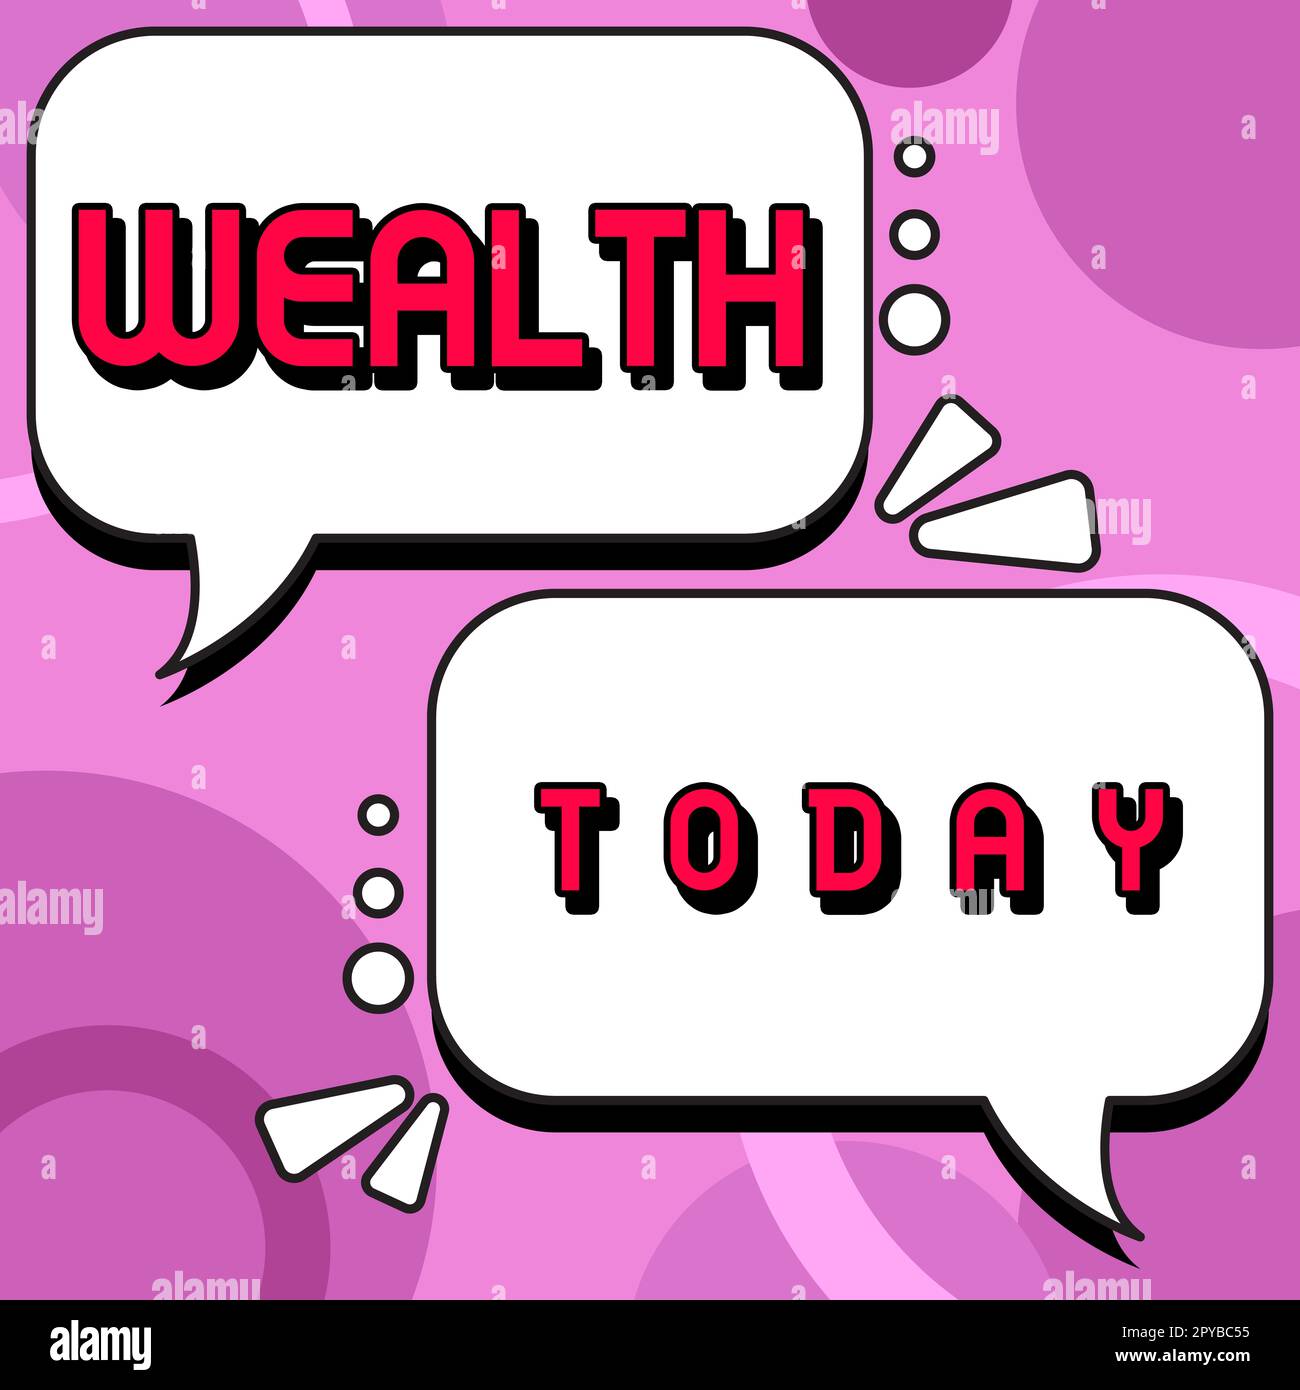 Text showing inspiration Wealth. Internet Concept Abundance of valuable possessions or money To be very rich Luxury Stock Photo